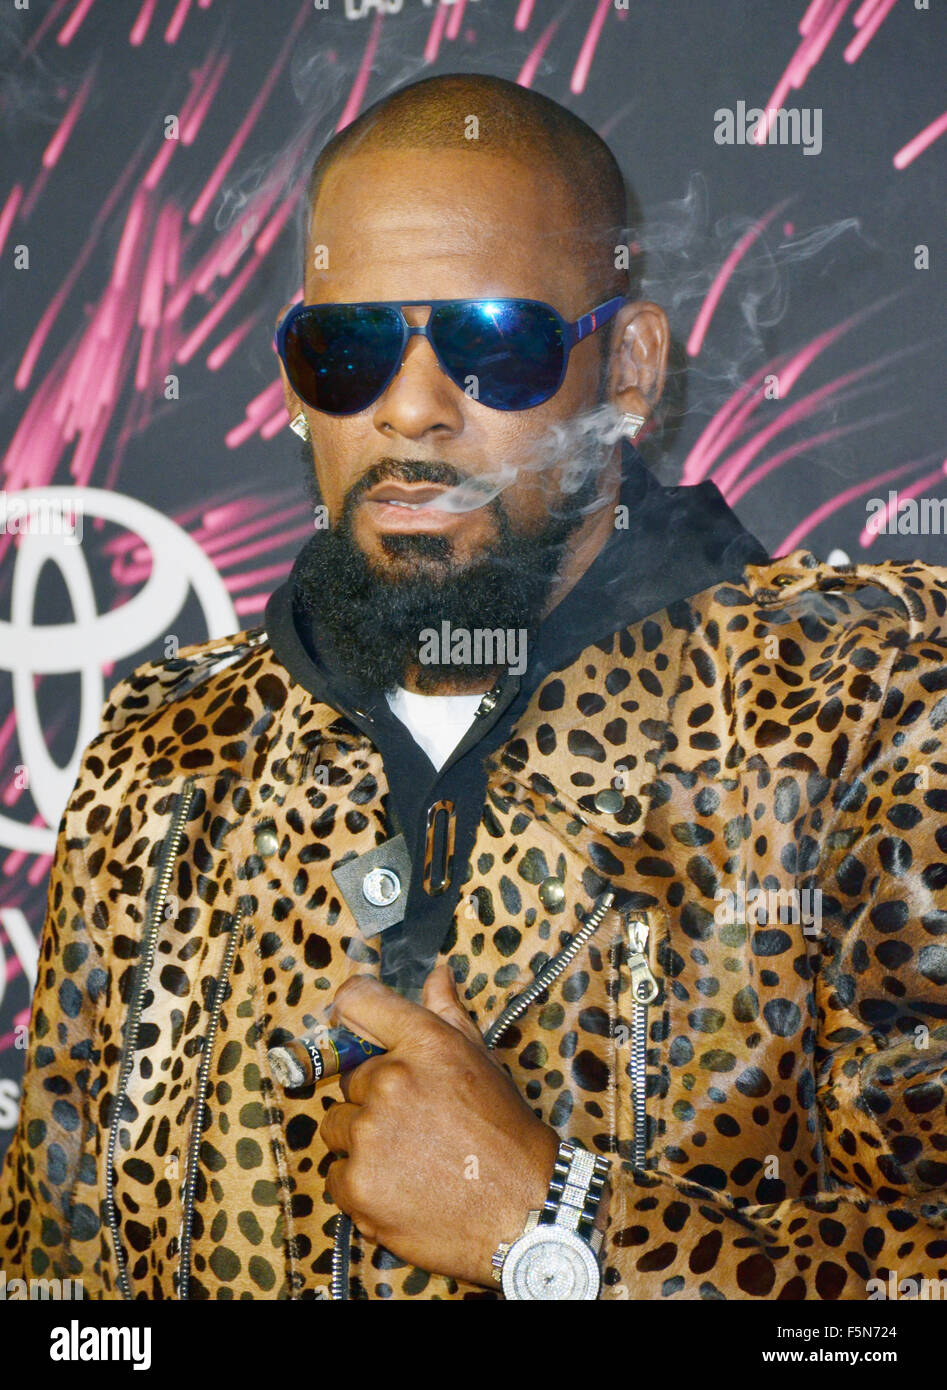 Las Vegas, Nevada, USA. 6th Nov, 2015. Singer R Kelly attends the 2015 Soul  Train Awards at the Orleans Arena on November 6, 2015 in Las Vegas, Nevada.  Credit: Marcel Thomas/ZUMA Wire/Alamy